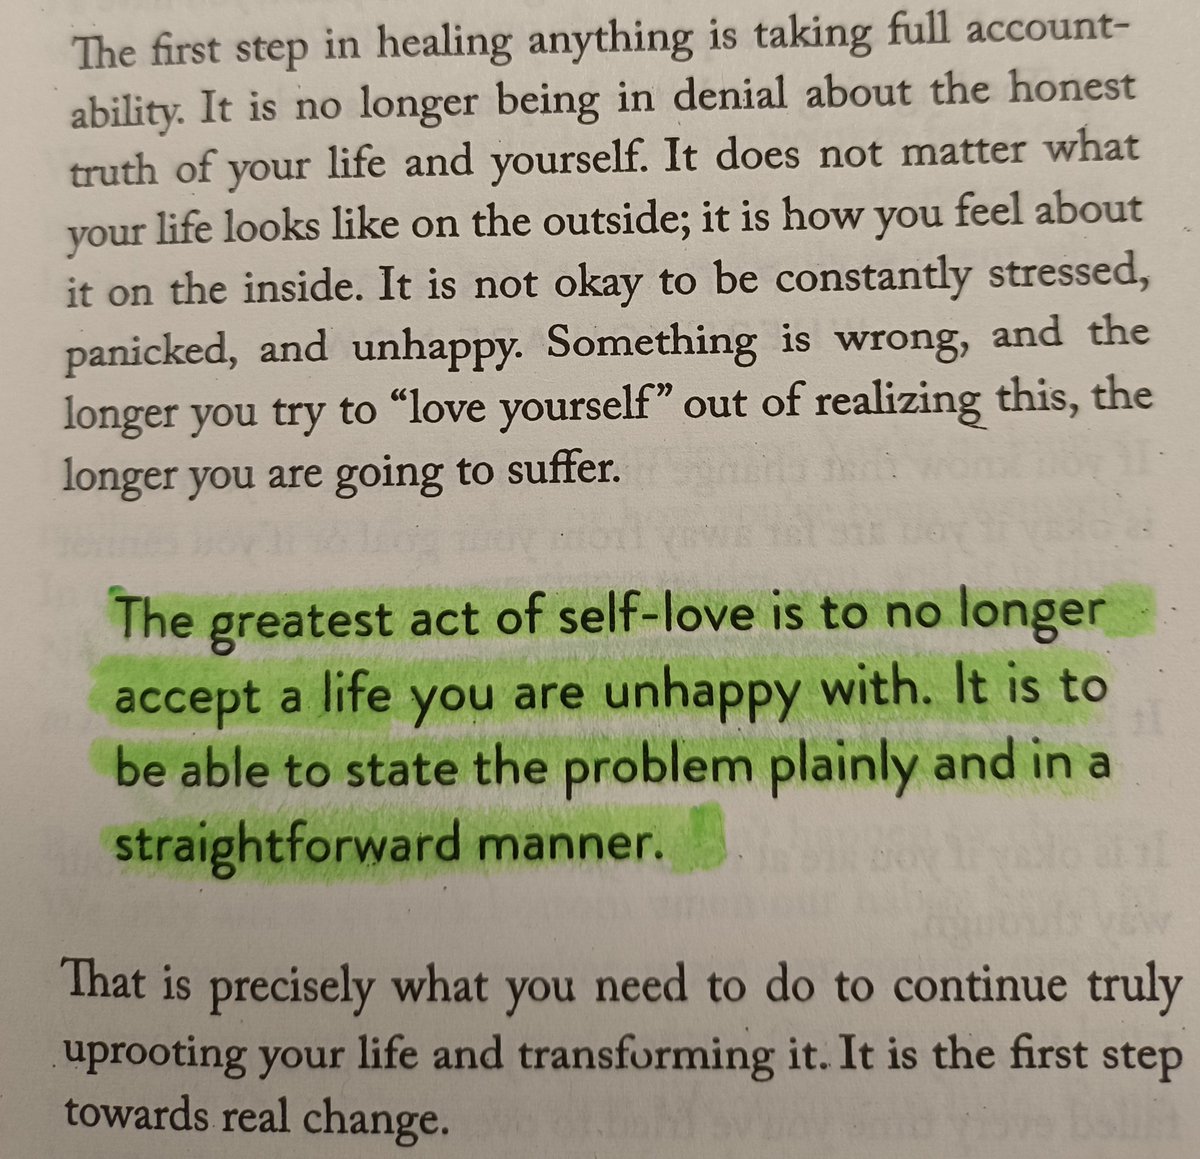 'The greatest act of self-love is to no longer accept a life you are unhappy with. It is to be able to state the problem plainly and in a straightforward manner' - The mountain is you 📖
#books#bookquotes#selfhelpbooks